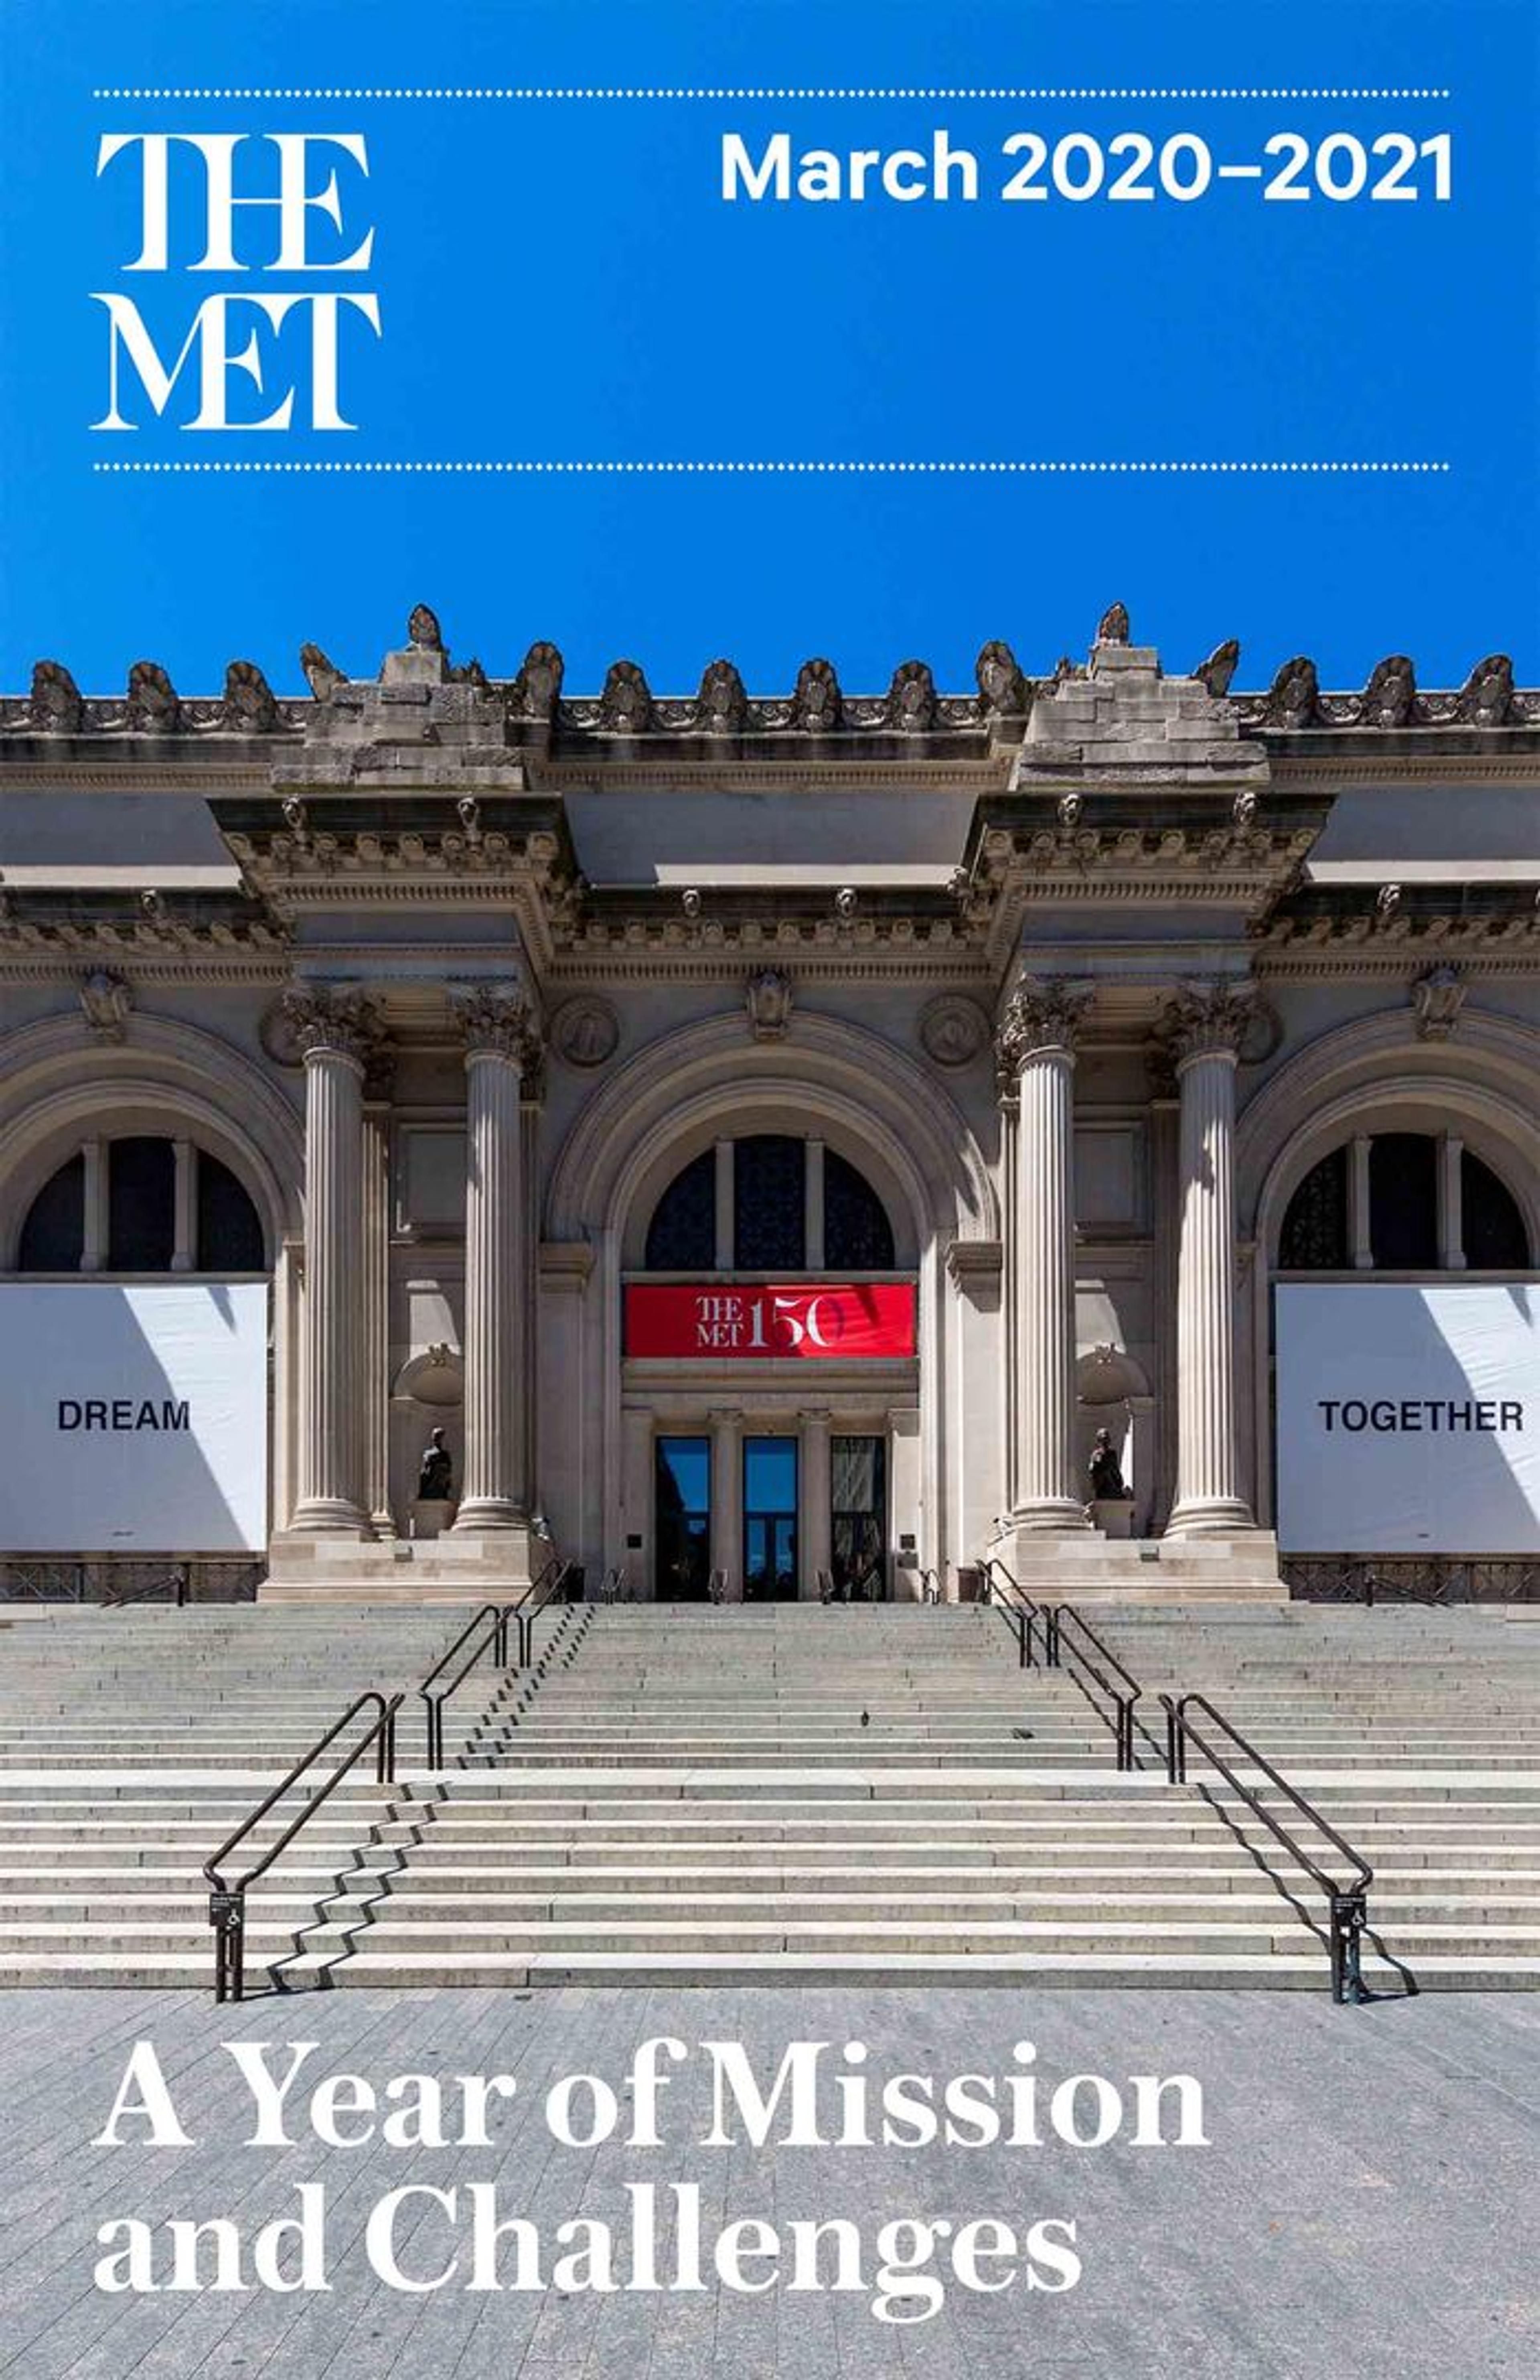 Cover of The Met Report. A photograph of The Met Fifth Avenue facade with the text "The Met March 2020–2021 A Year of Mission and Challenges"